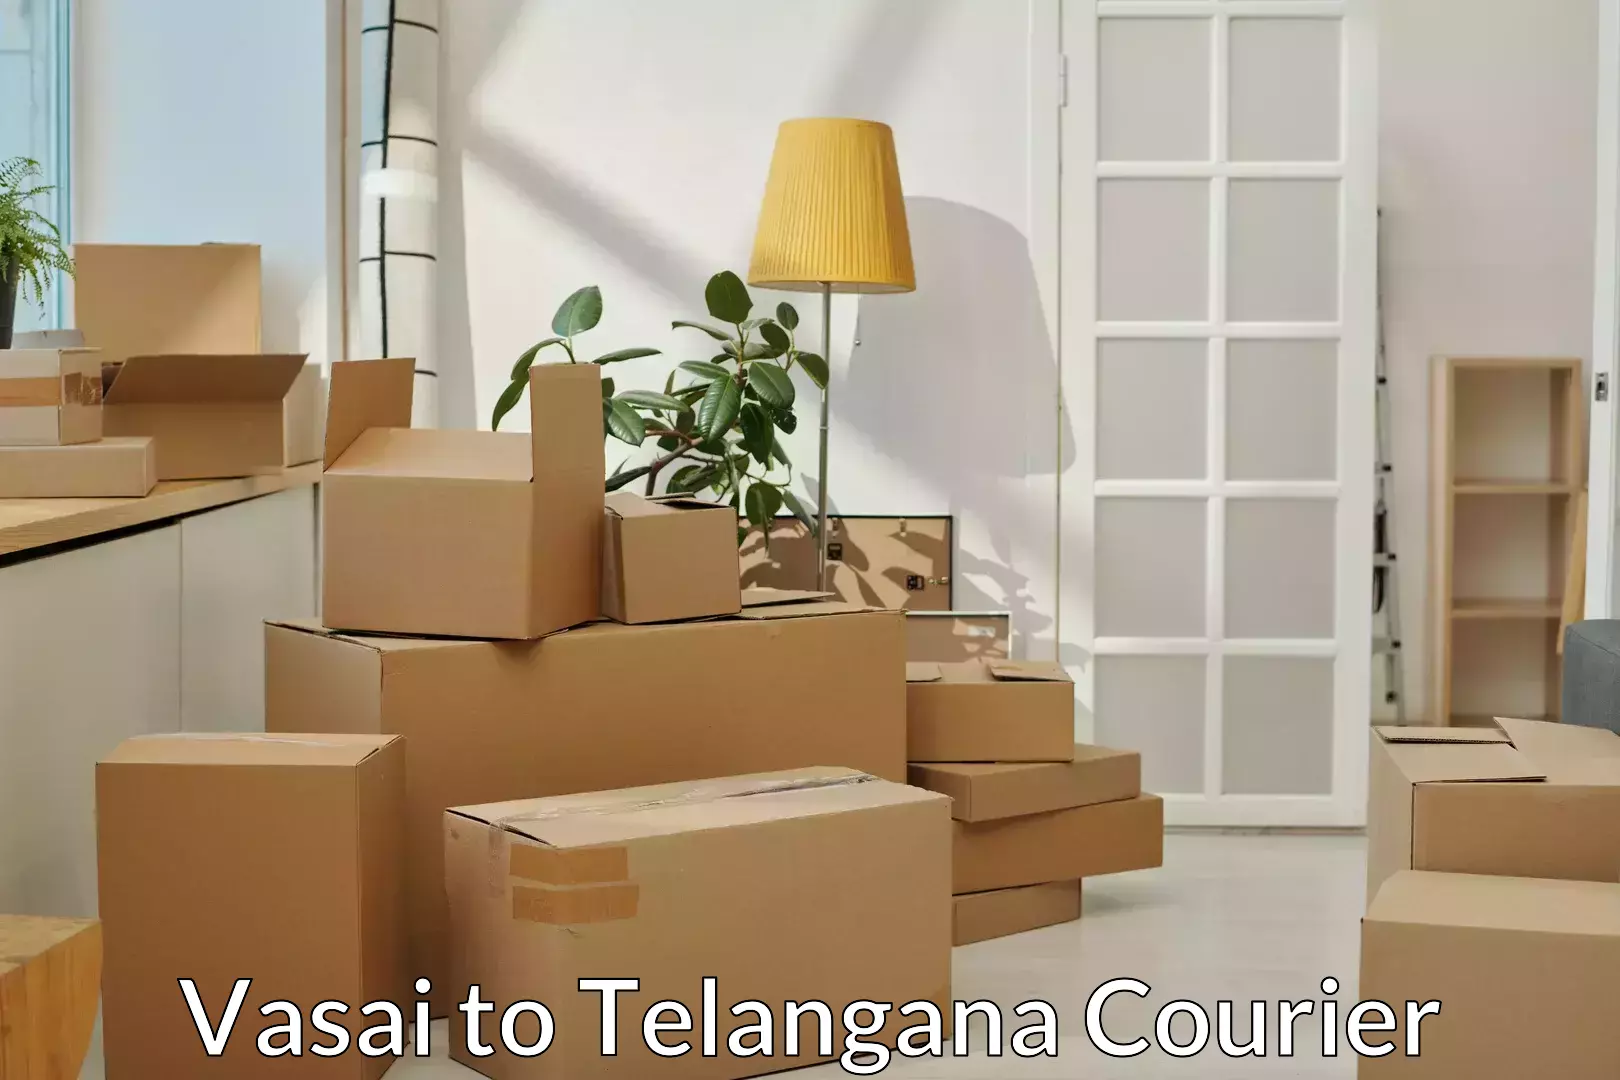 Trusted moving company in Vasai to Rayaparthi